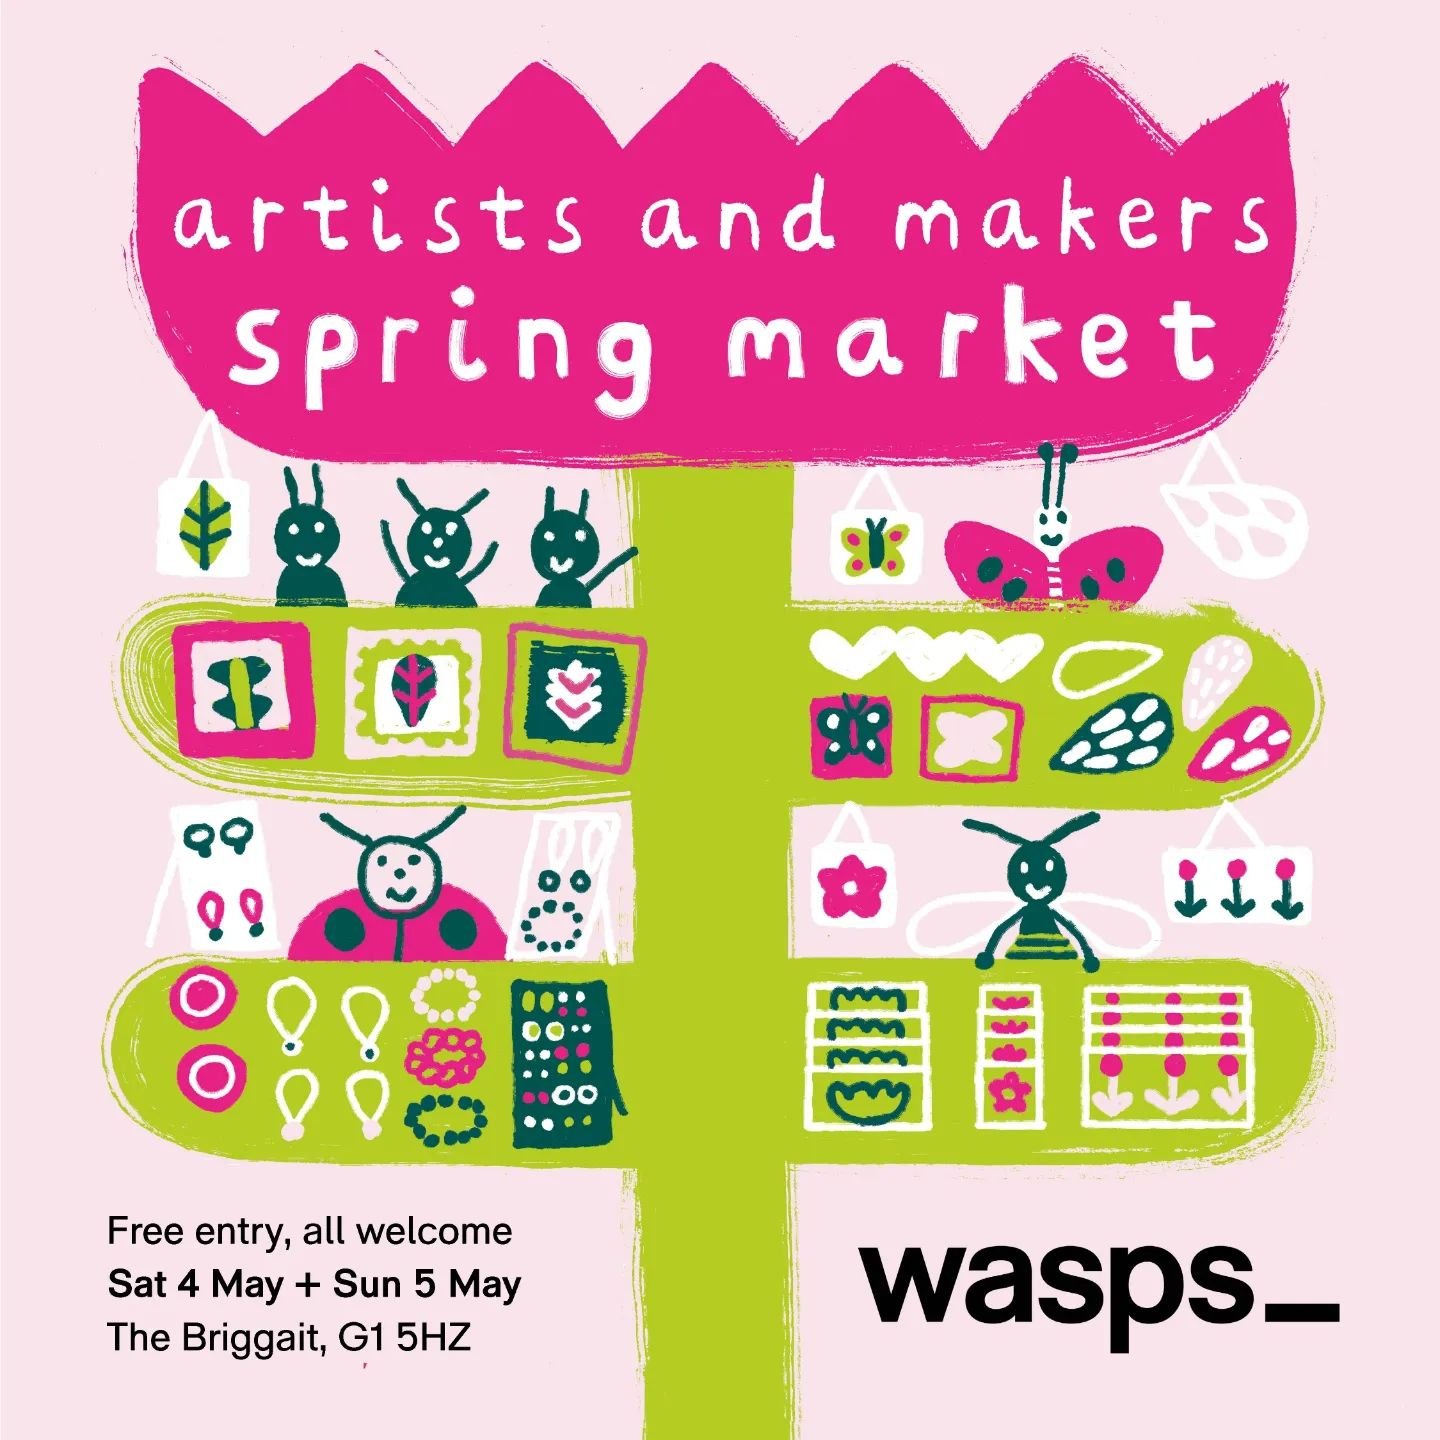 Find me at the Wasps Spring Market this weekend at The Briggait 

10-5 on Saturday &amp; 10-4 on Sunday!

#waspsspringmarket #waspsmarket #thebriggait #glasgowevents #whatsonglasgow #glasgowart #glasgowmarkets #weekendplans #visitglasgow #glasgowpopu